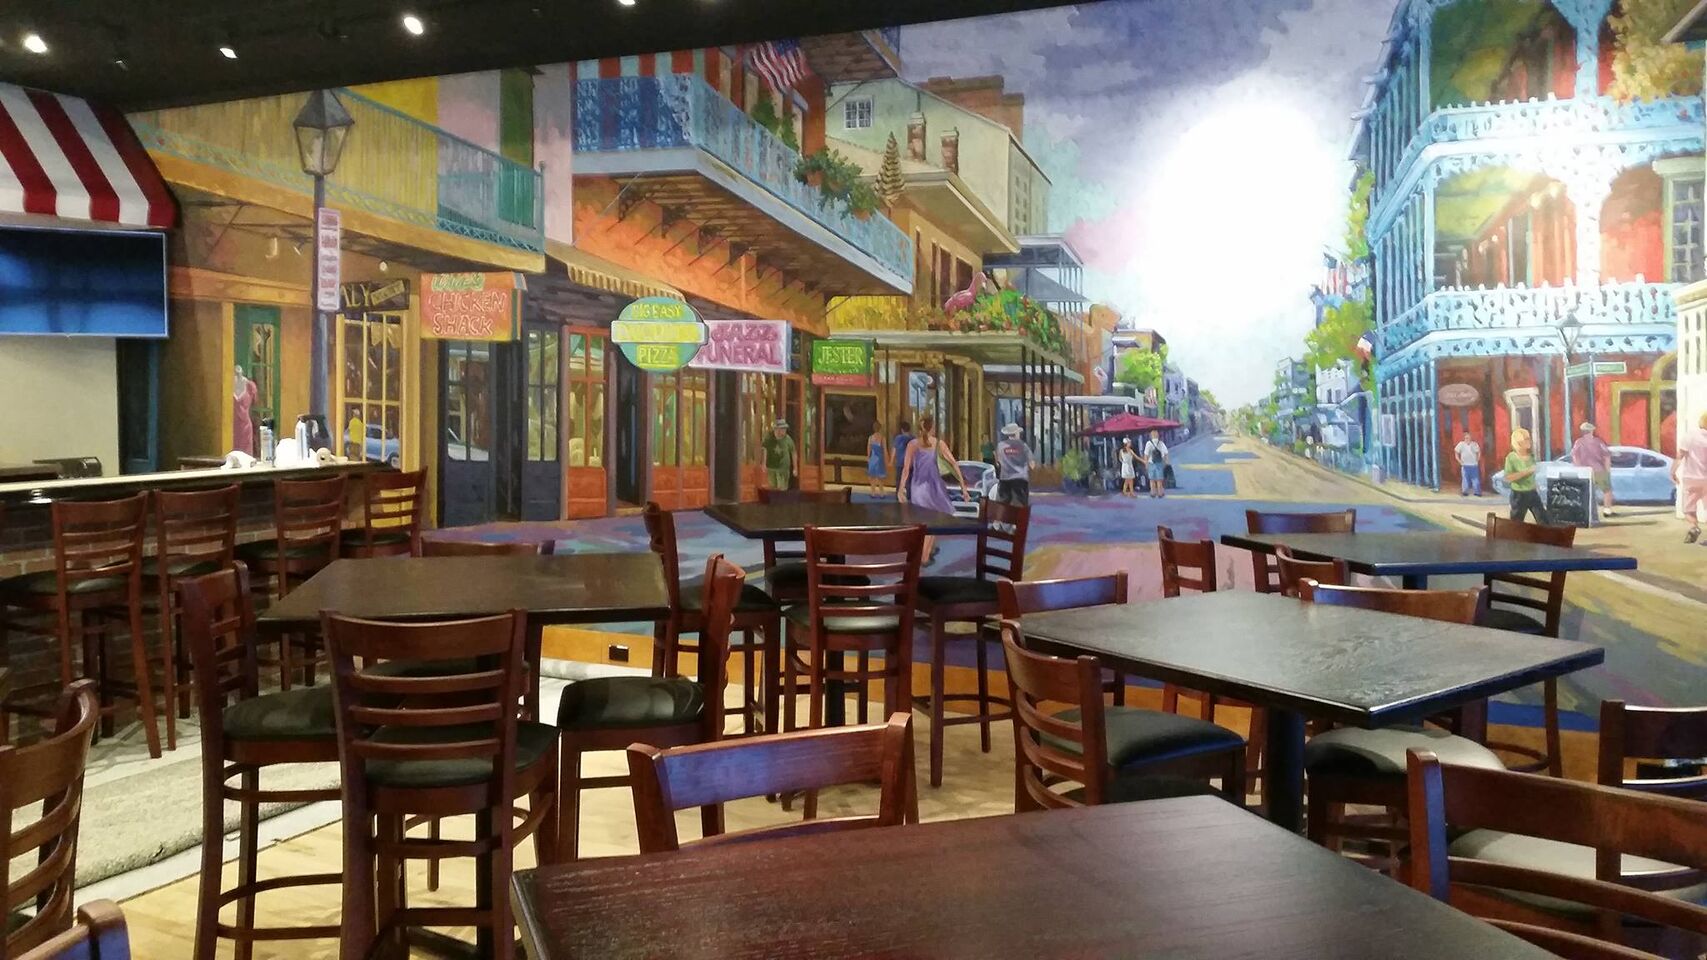 A photo of J. Gumbo's